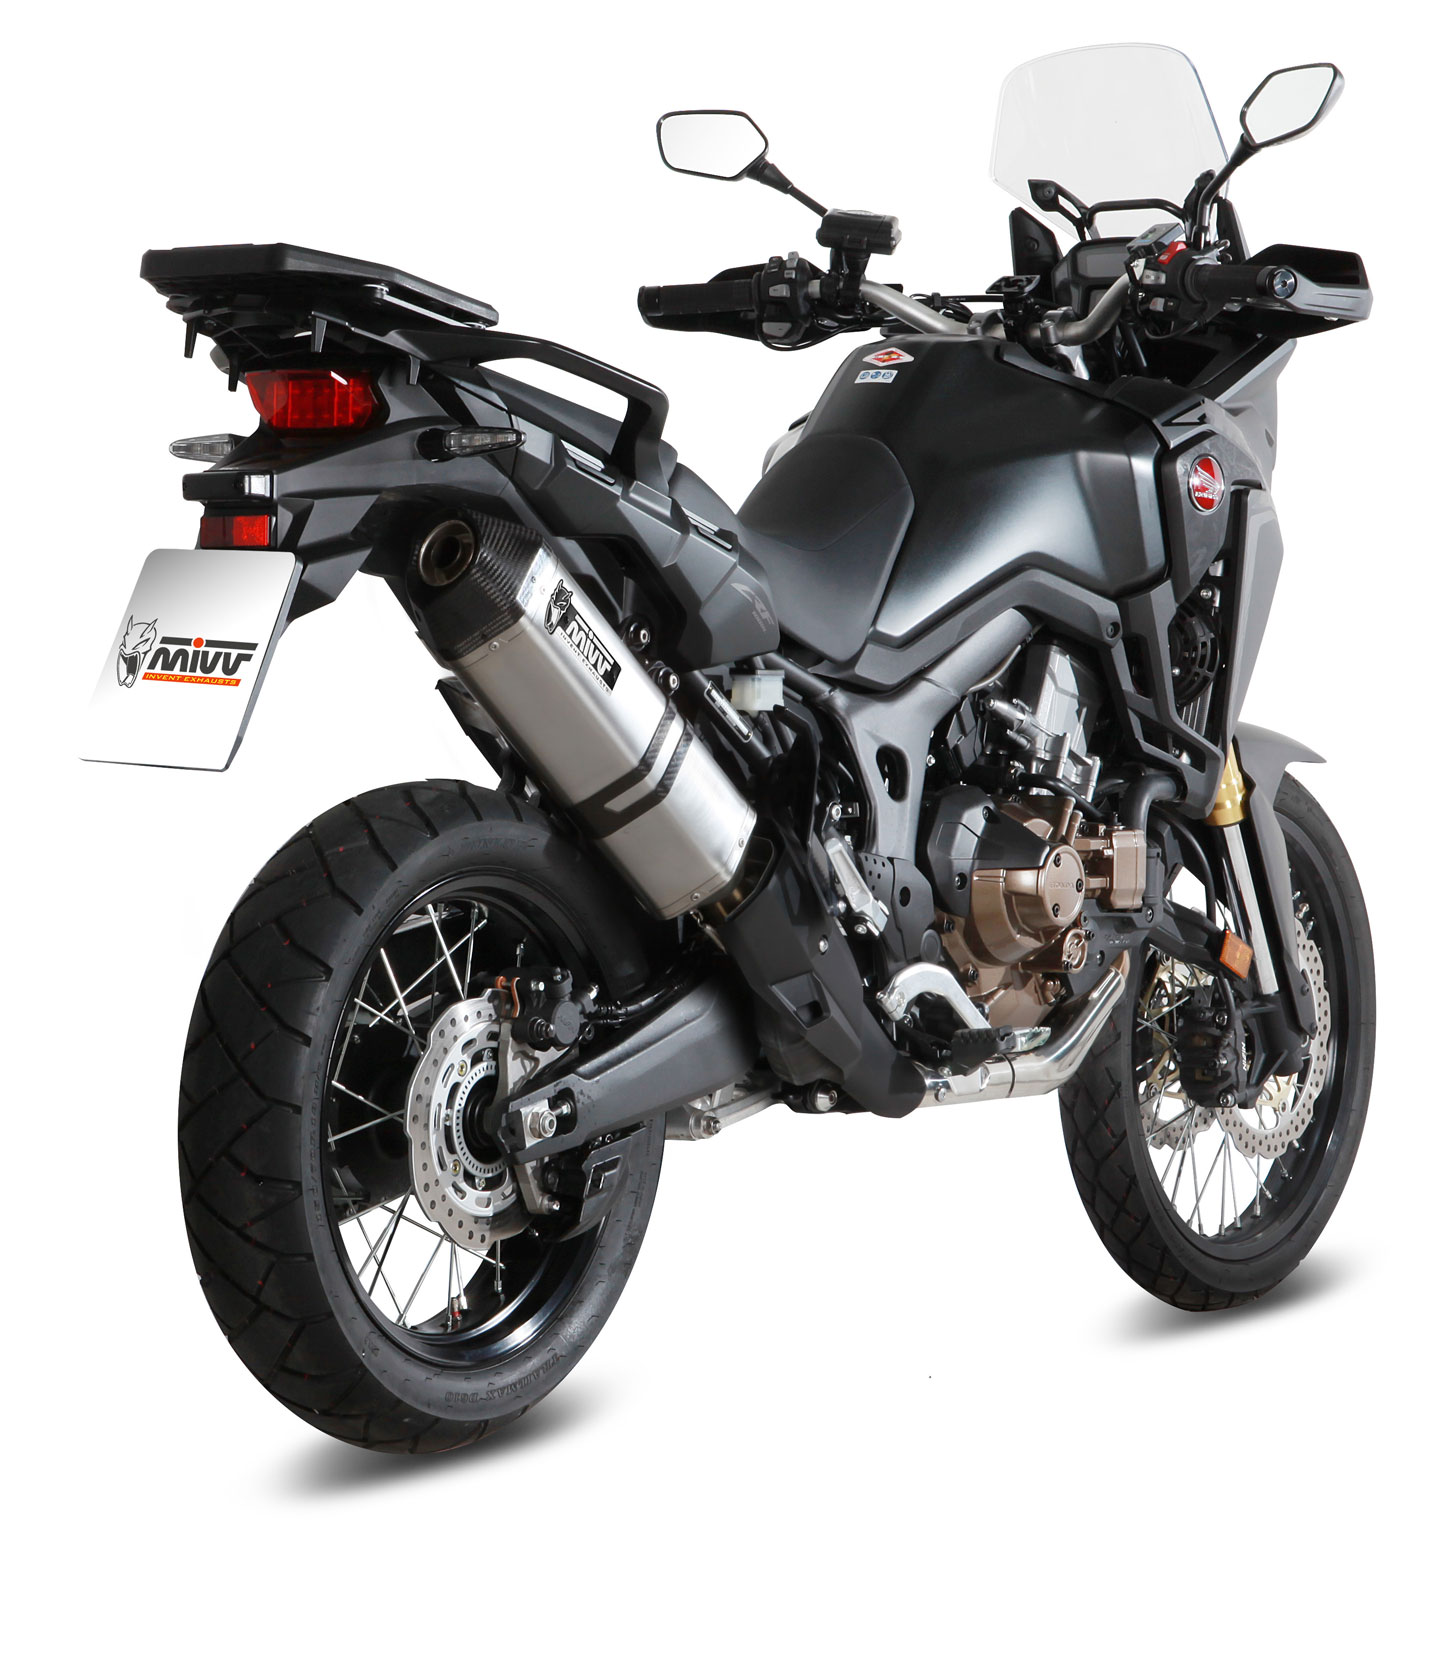 CRF1000L AfricaTwin with MIVV Speed Edge 2